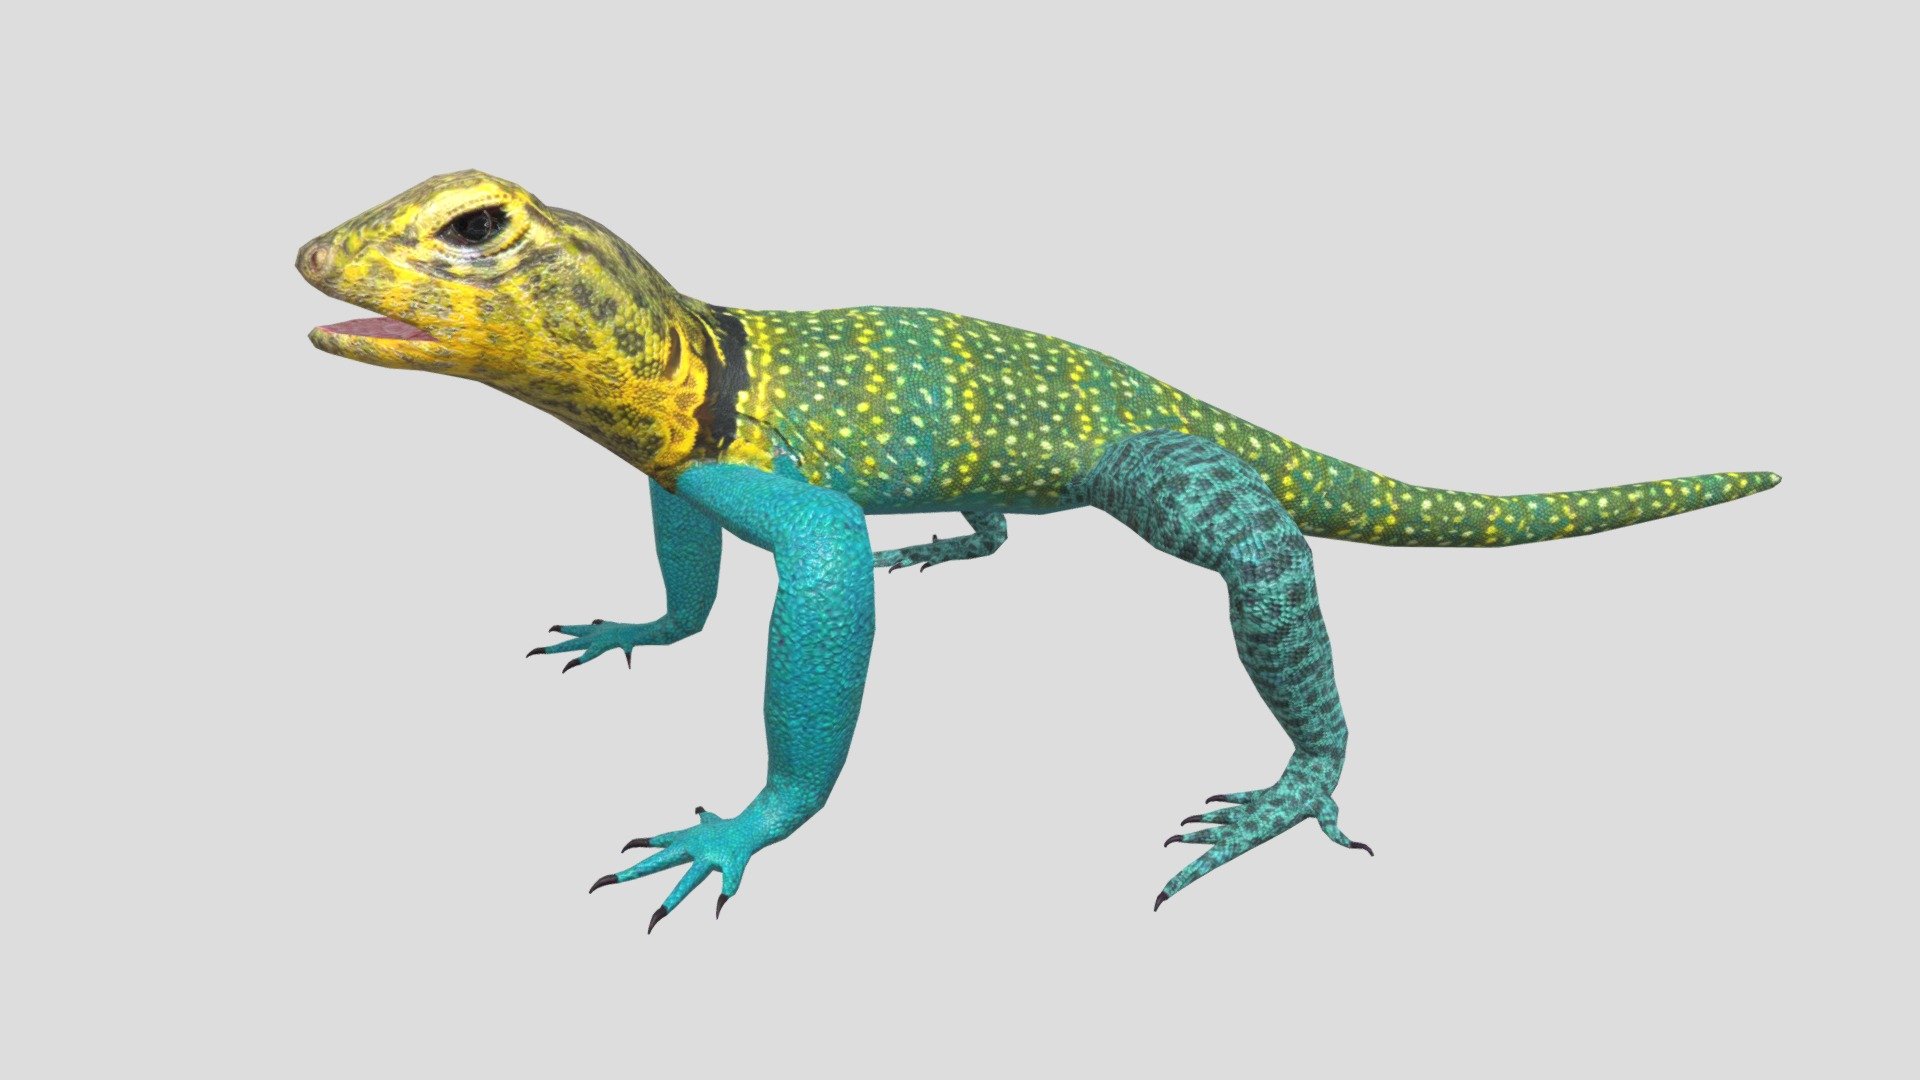 3d model of Collared Lizard.
Modeled in Blender.
-The model is one single object
- All textures and materials are mapped in every format.
-Textures JPEG color and bump maps
-Texture size 4096x4096 pxls.
- No special plugin needed to open scene 3d model